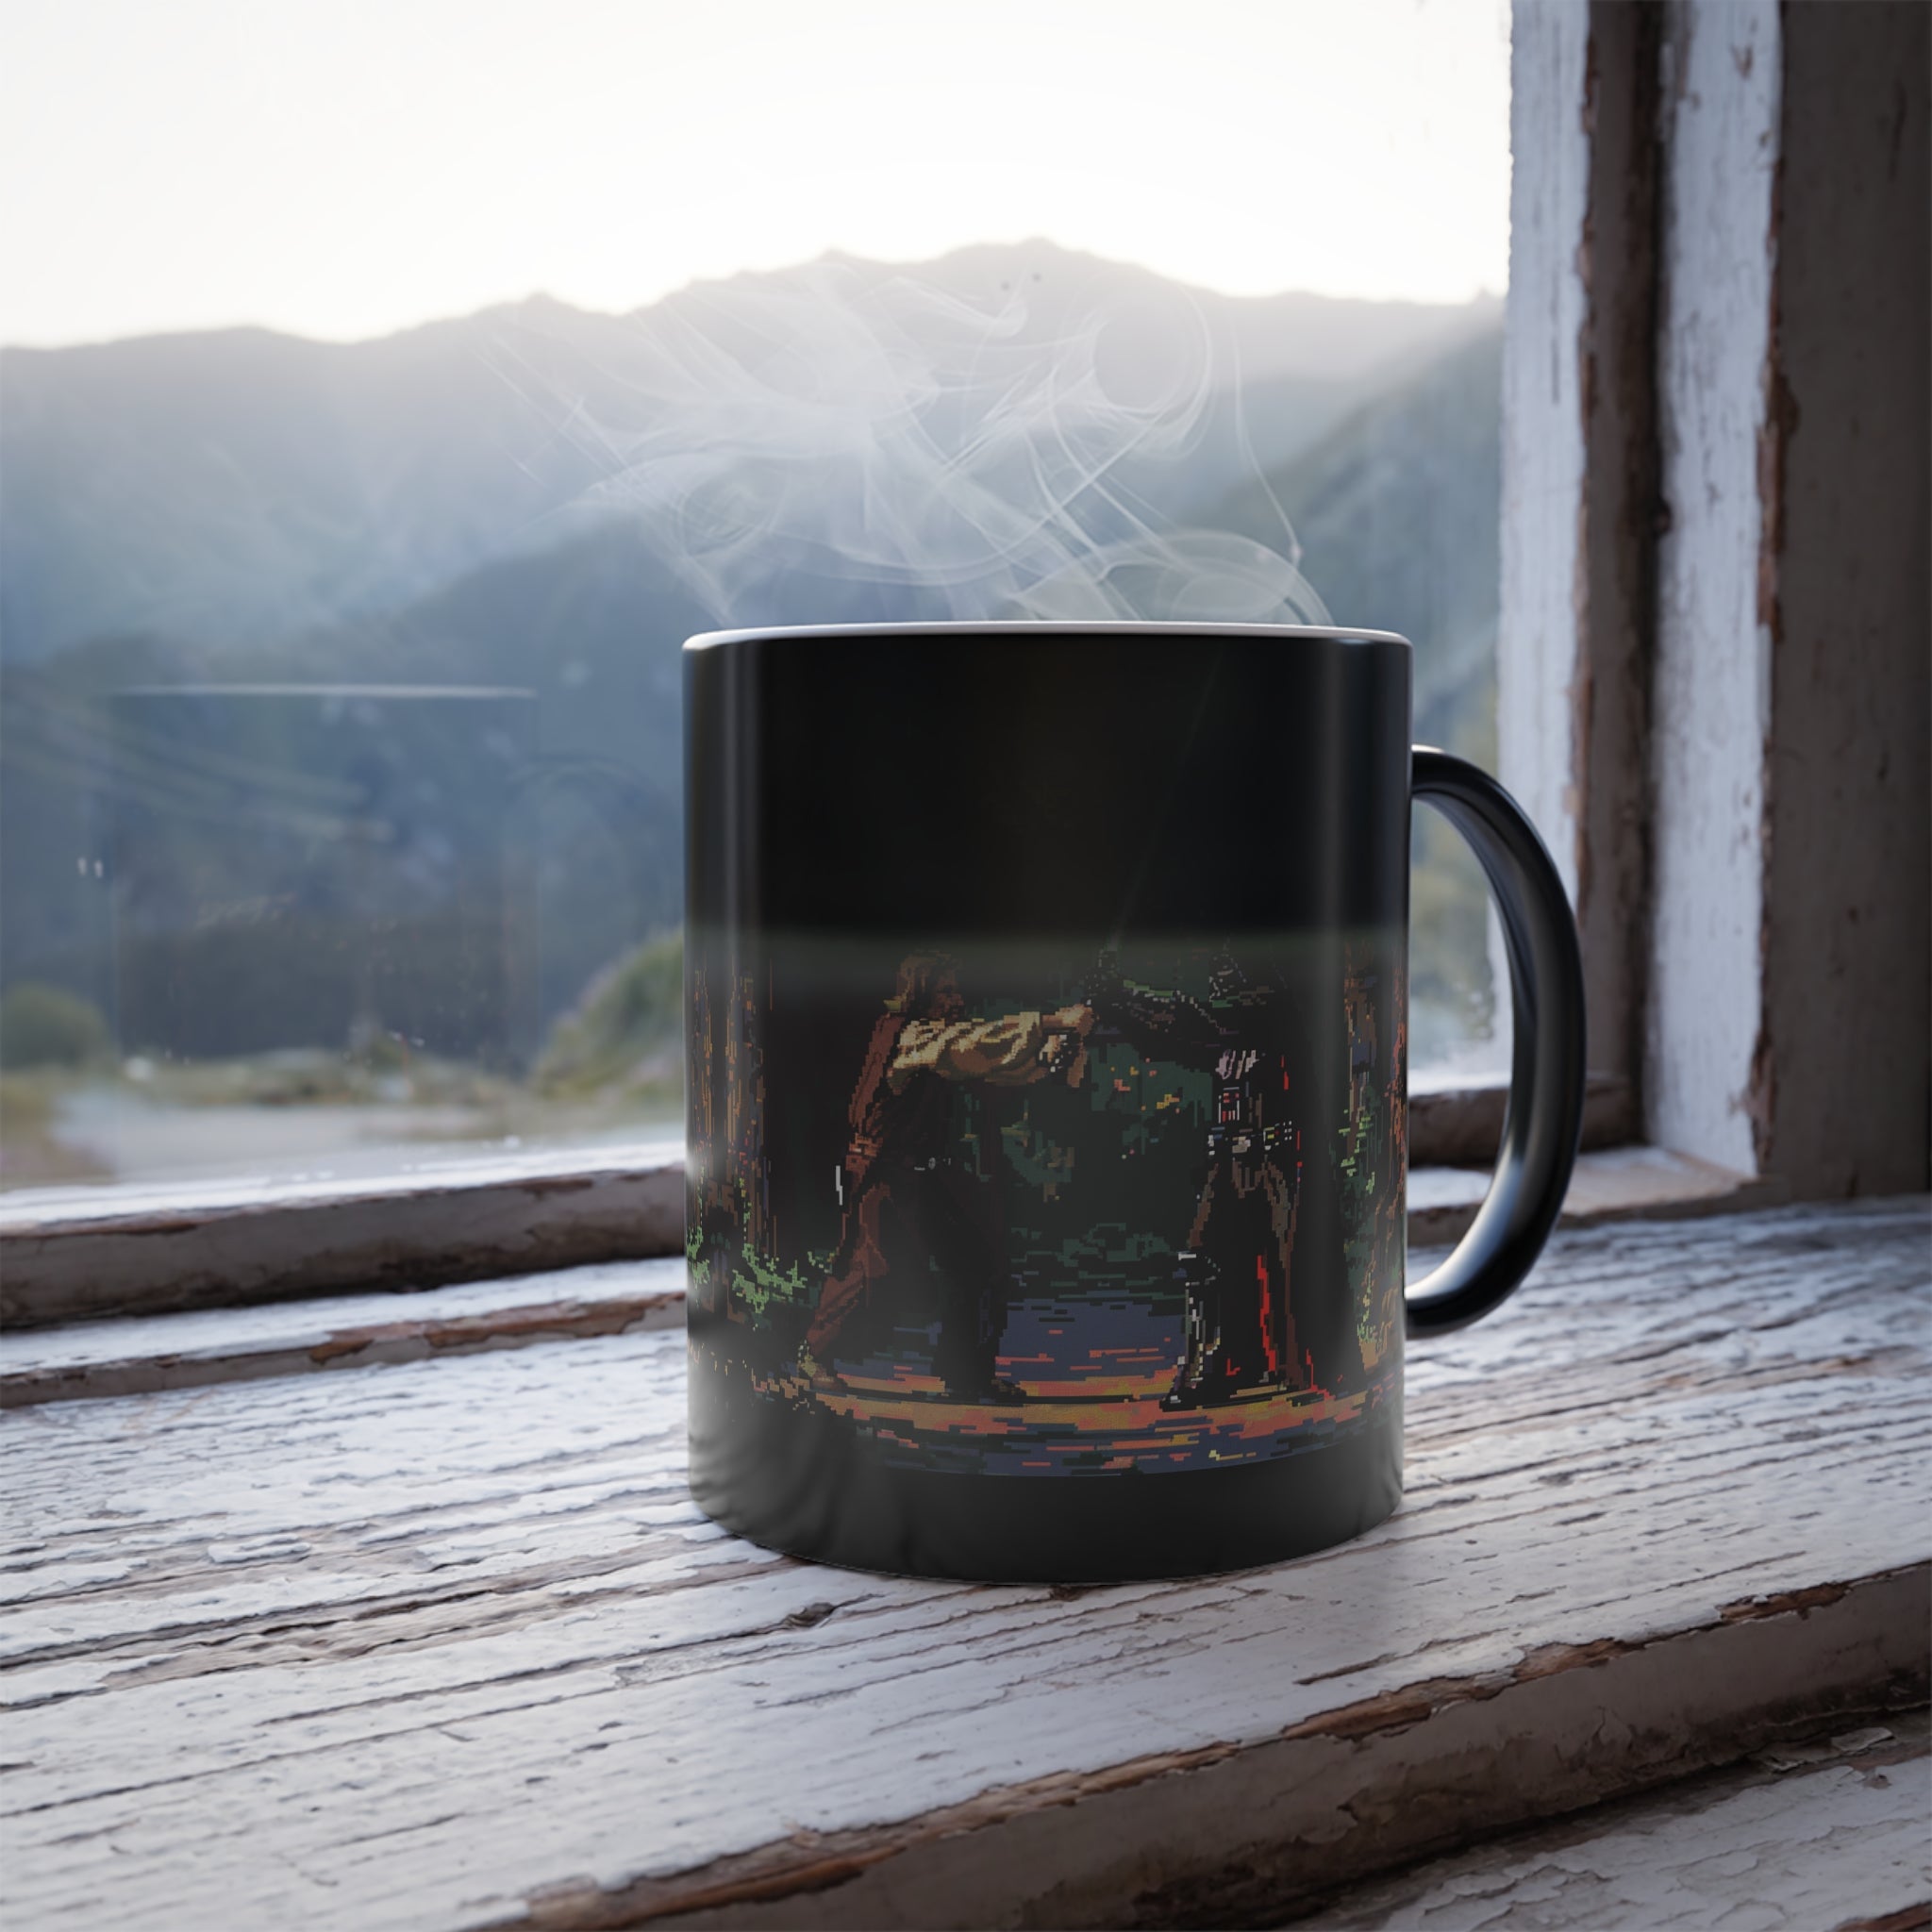 The image features an 11oz ceramic mug that appears black at room temperature. As a hot beverage is added, the mug reveals a dynamic, 16-bit style design inspired by the Dark Lord's journey and the infamous Order 66, capturing the essence of his quest to extinguish the light.